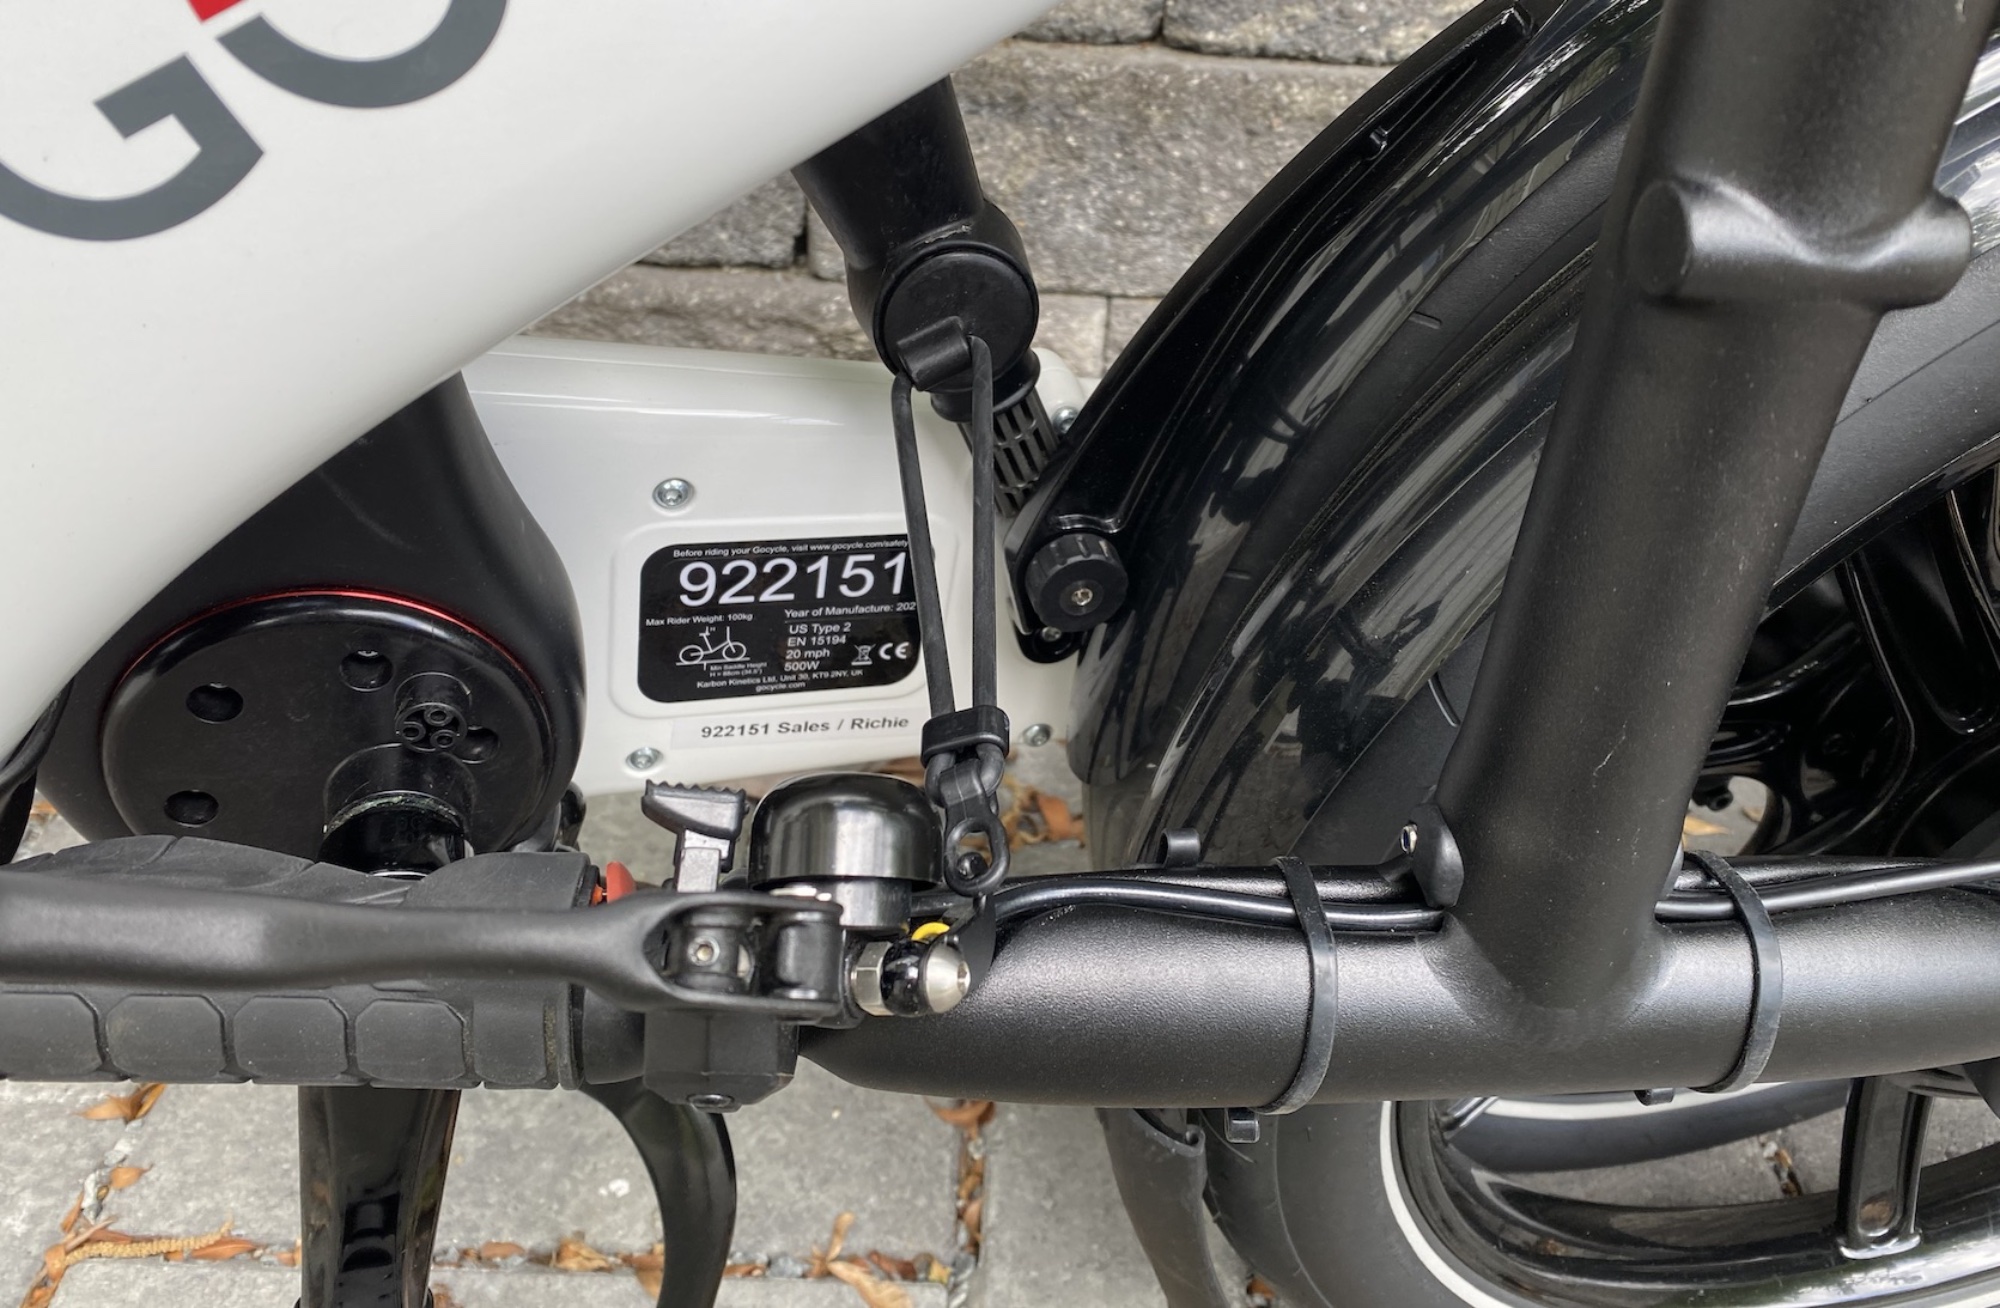 That same strap in use, holding the bike shut. Its location, both when stored and in use, was clearly thought through carefully.